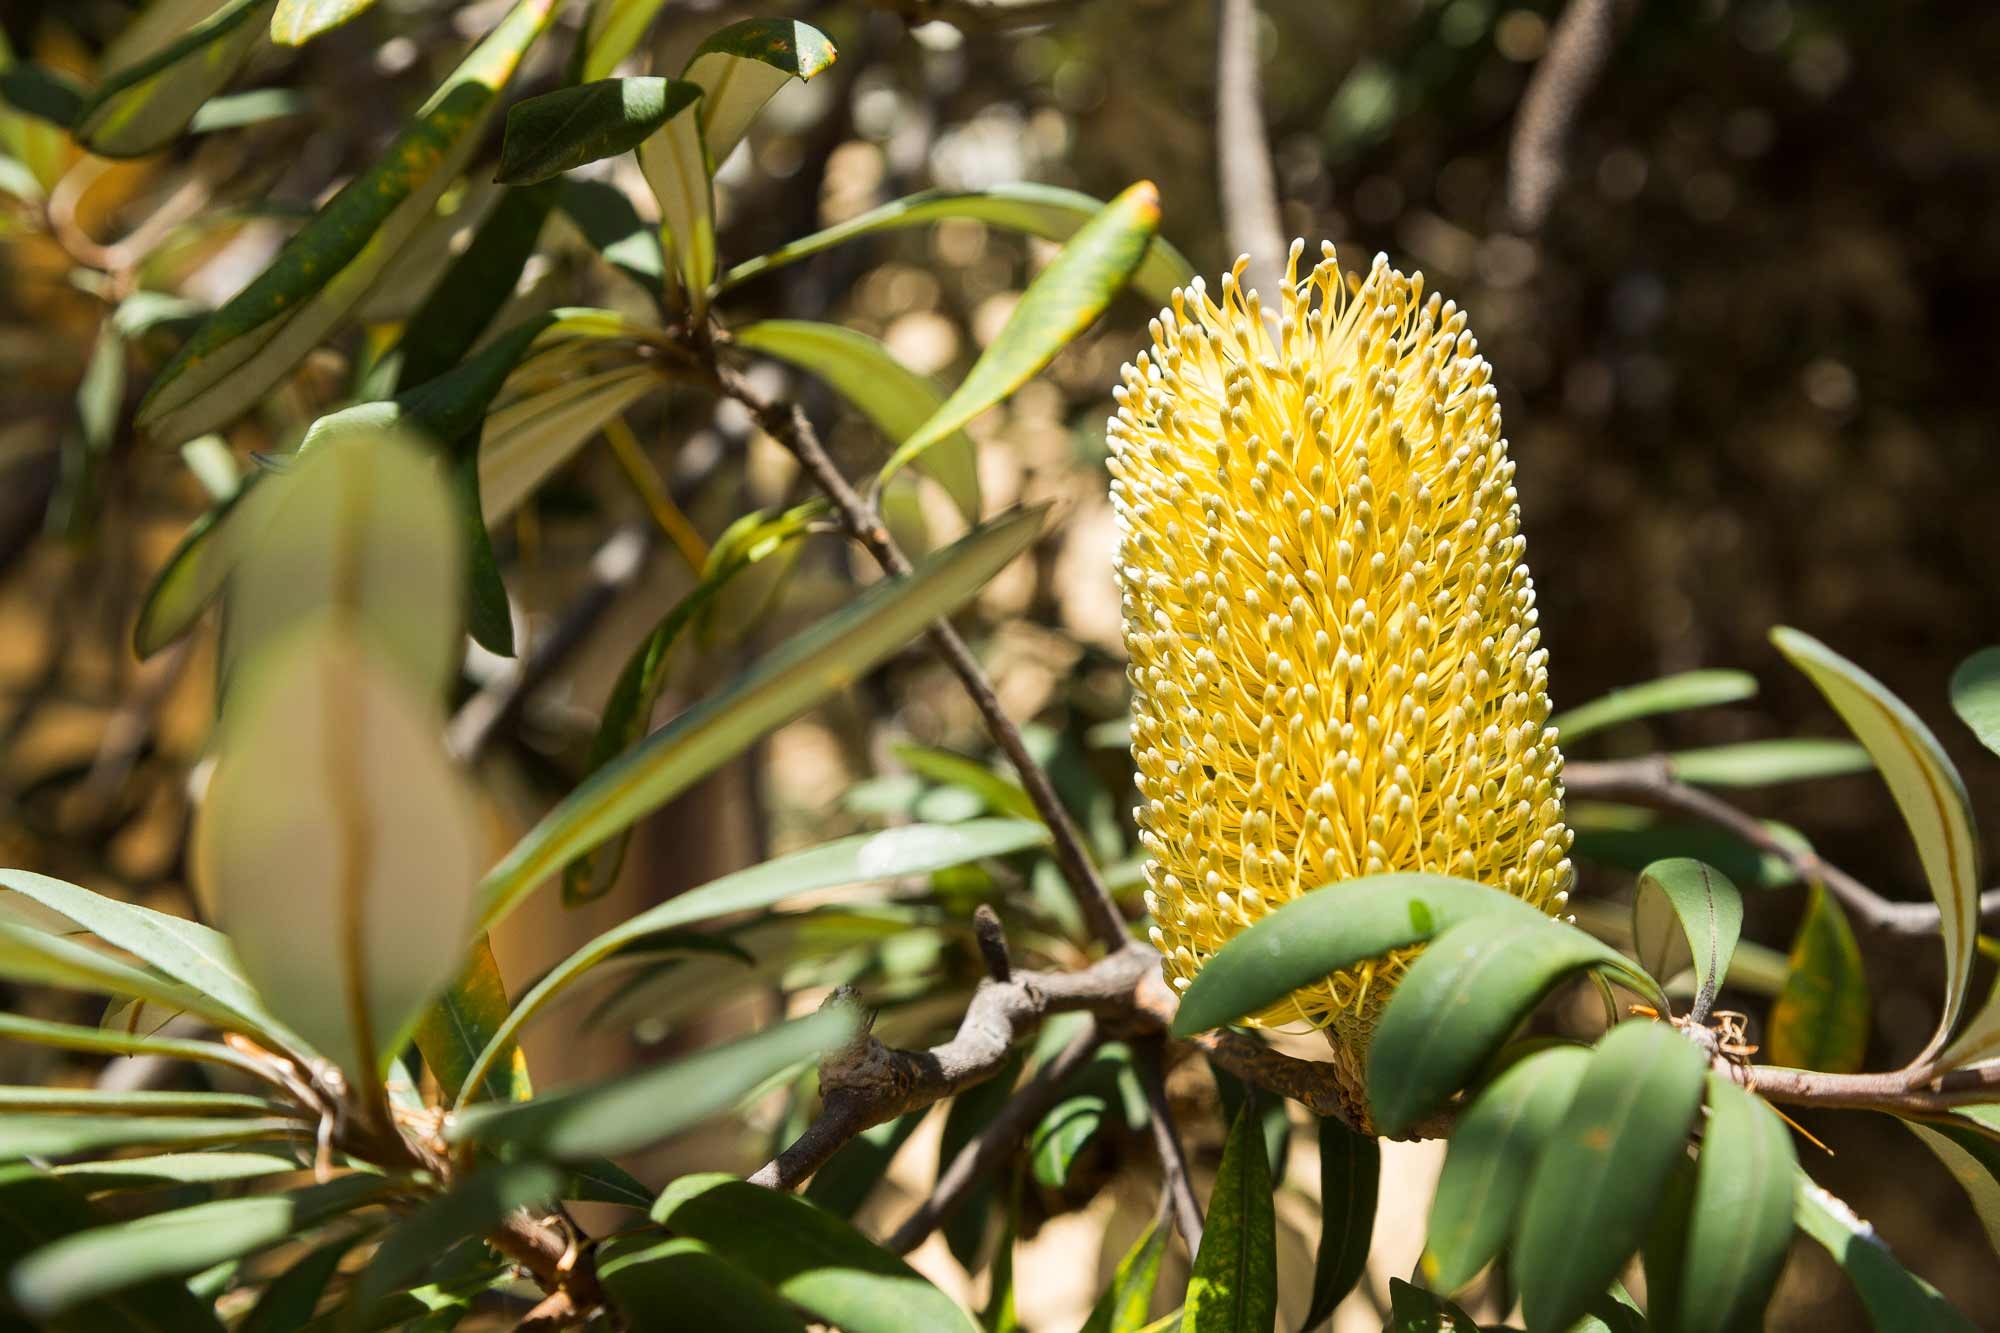 The golden, bottlebrush inflorescence of a coast banksia peaks out from between the tree’s leaves.